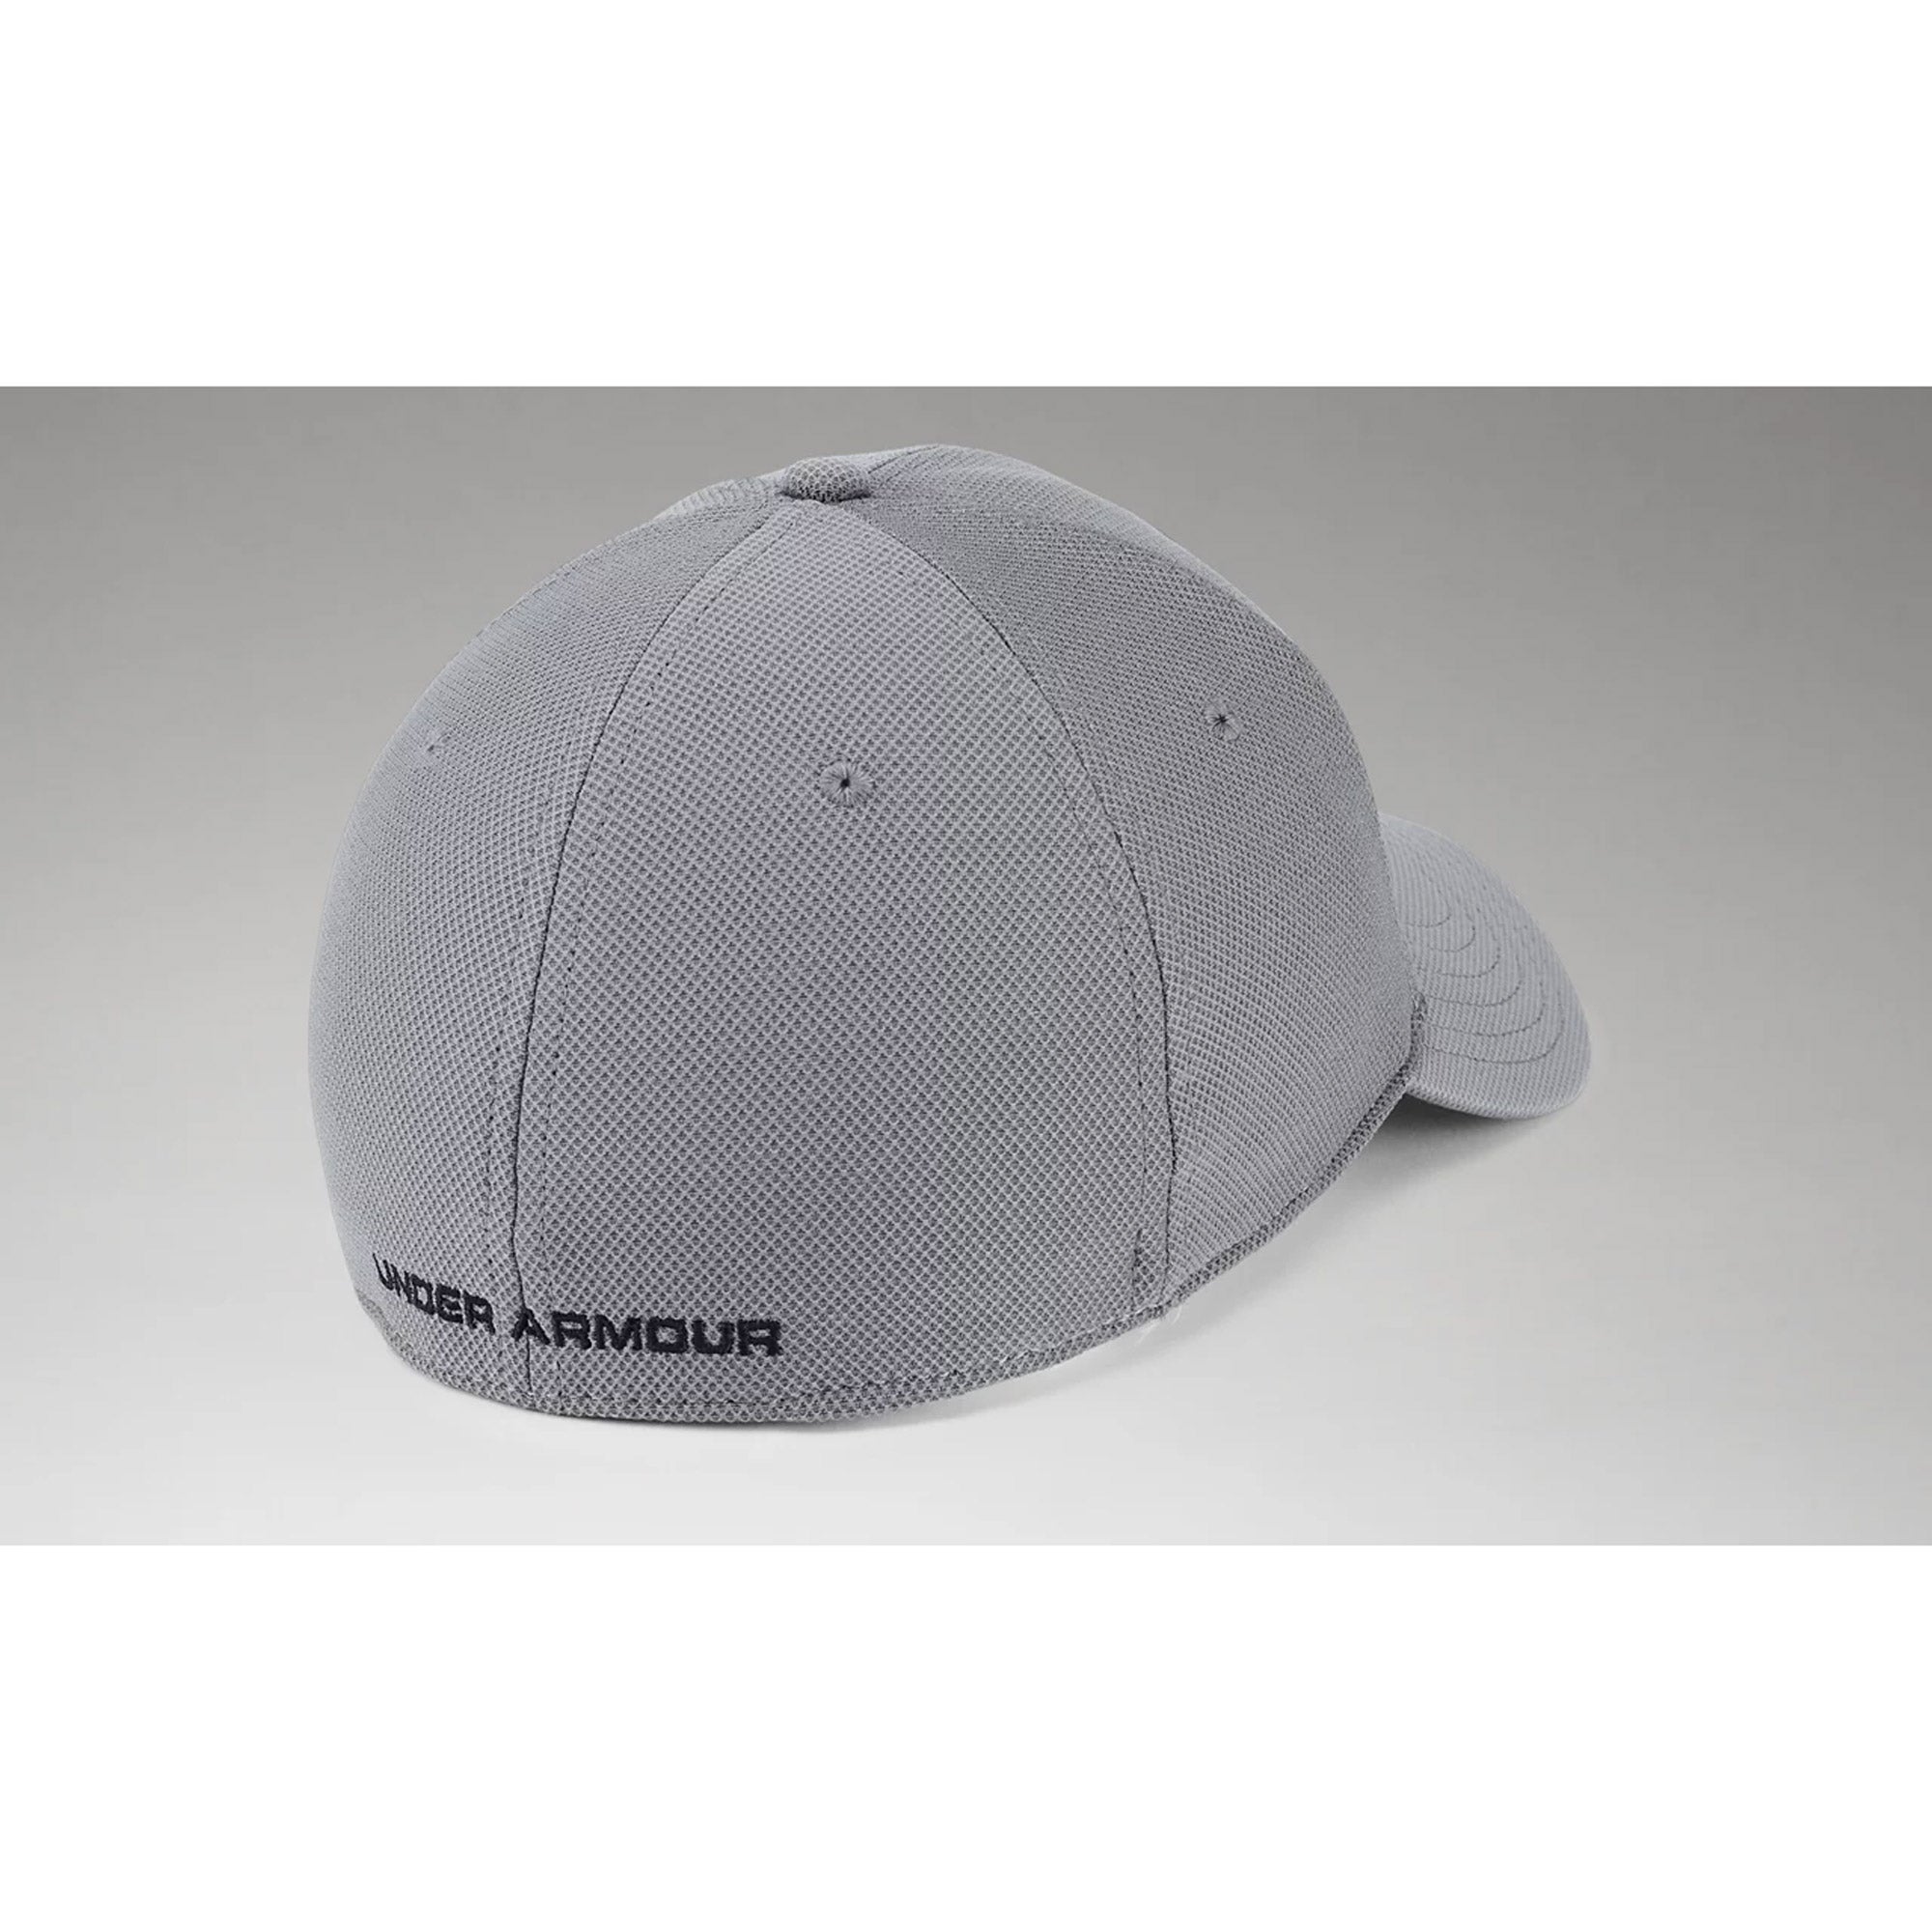 Under Armour 1305036-040 UA Blitzing 3.0 Ball Cap in Graphite with Black Logo Back